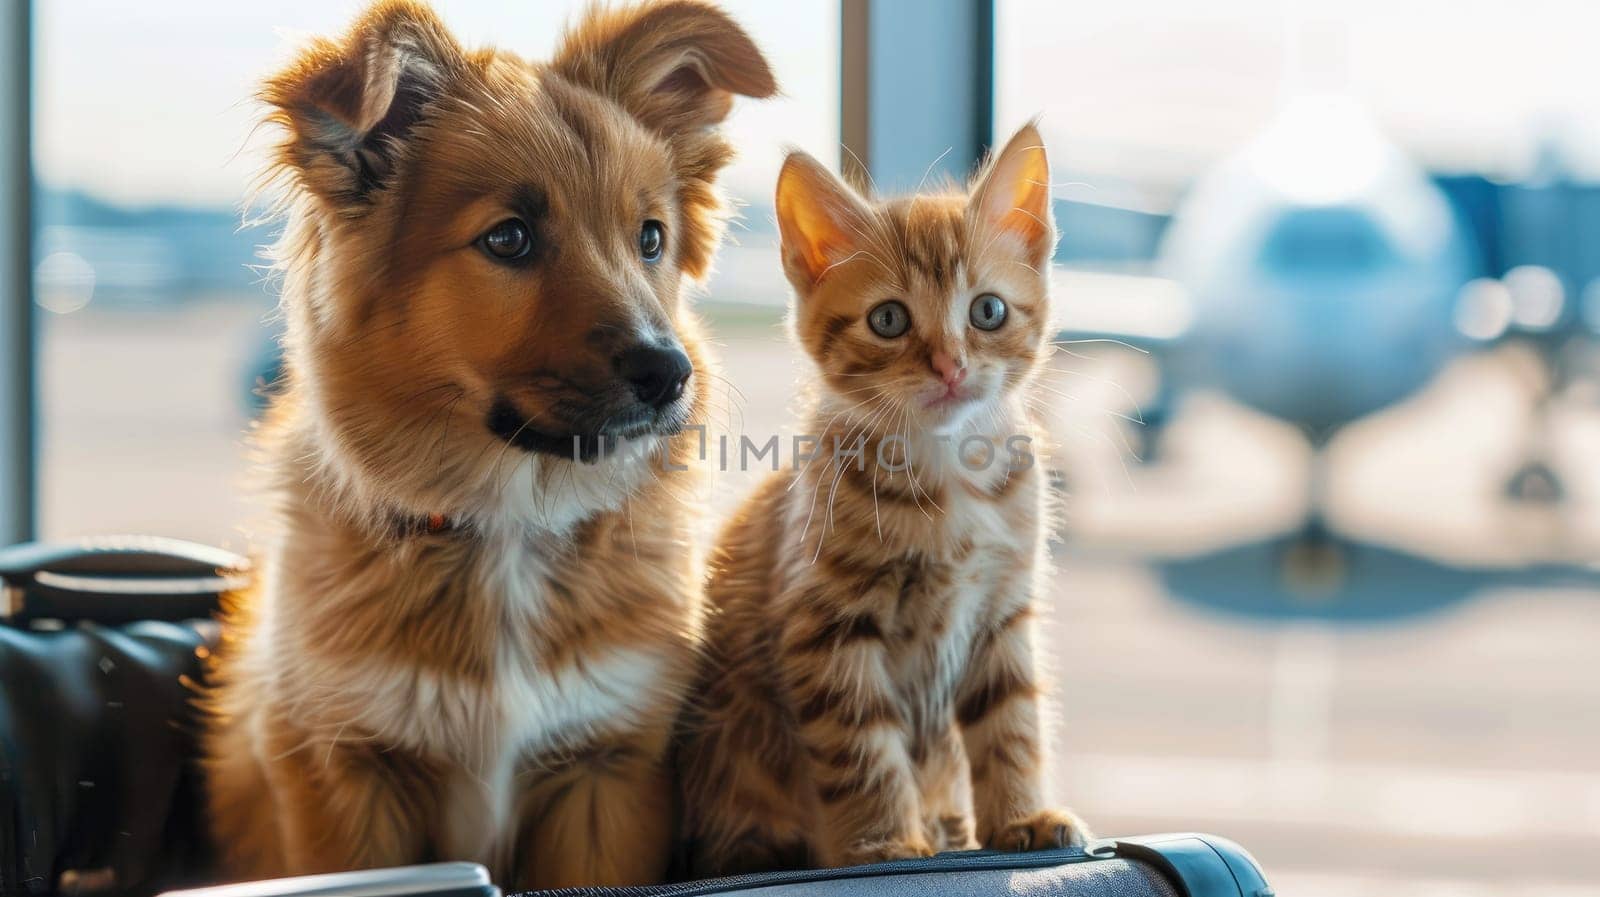 A dog and a cat are sitting on a bench in an airport waiting for their flight.